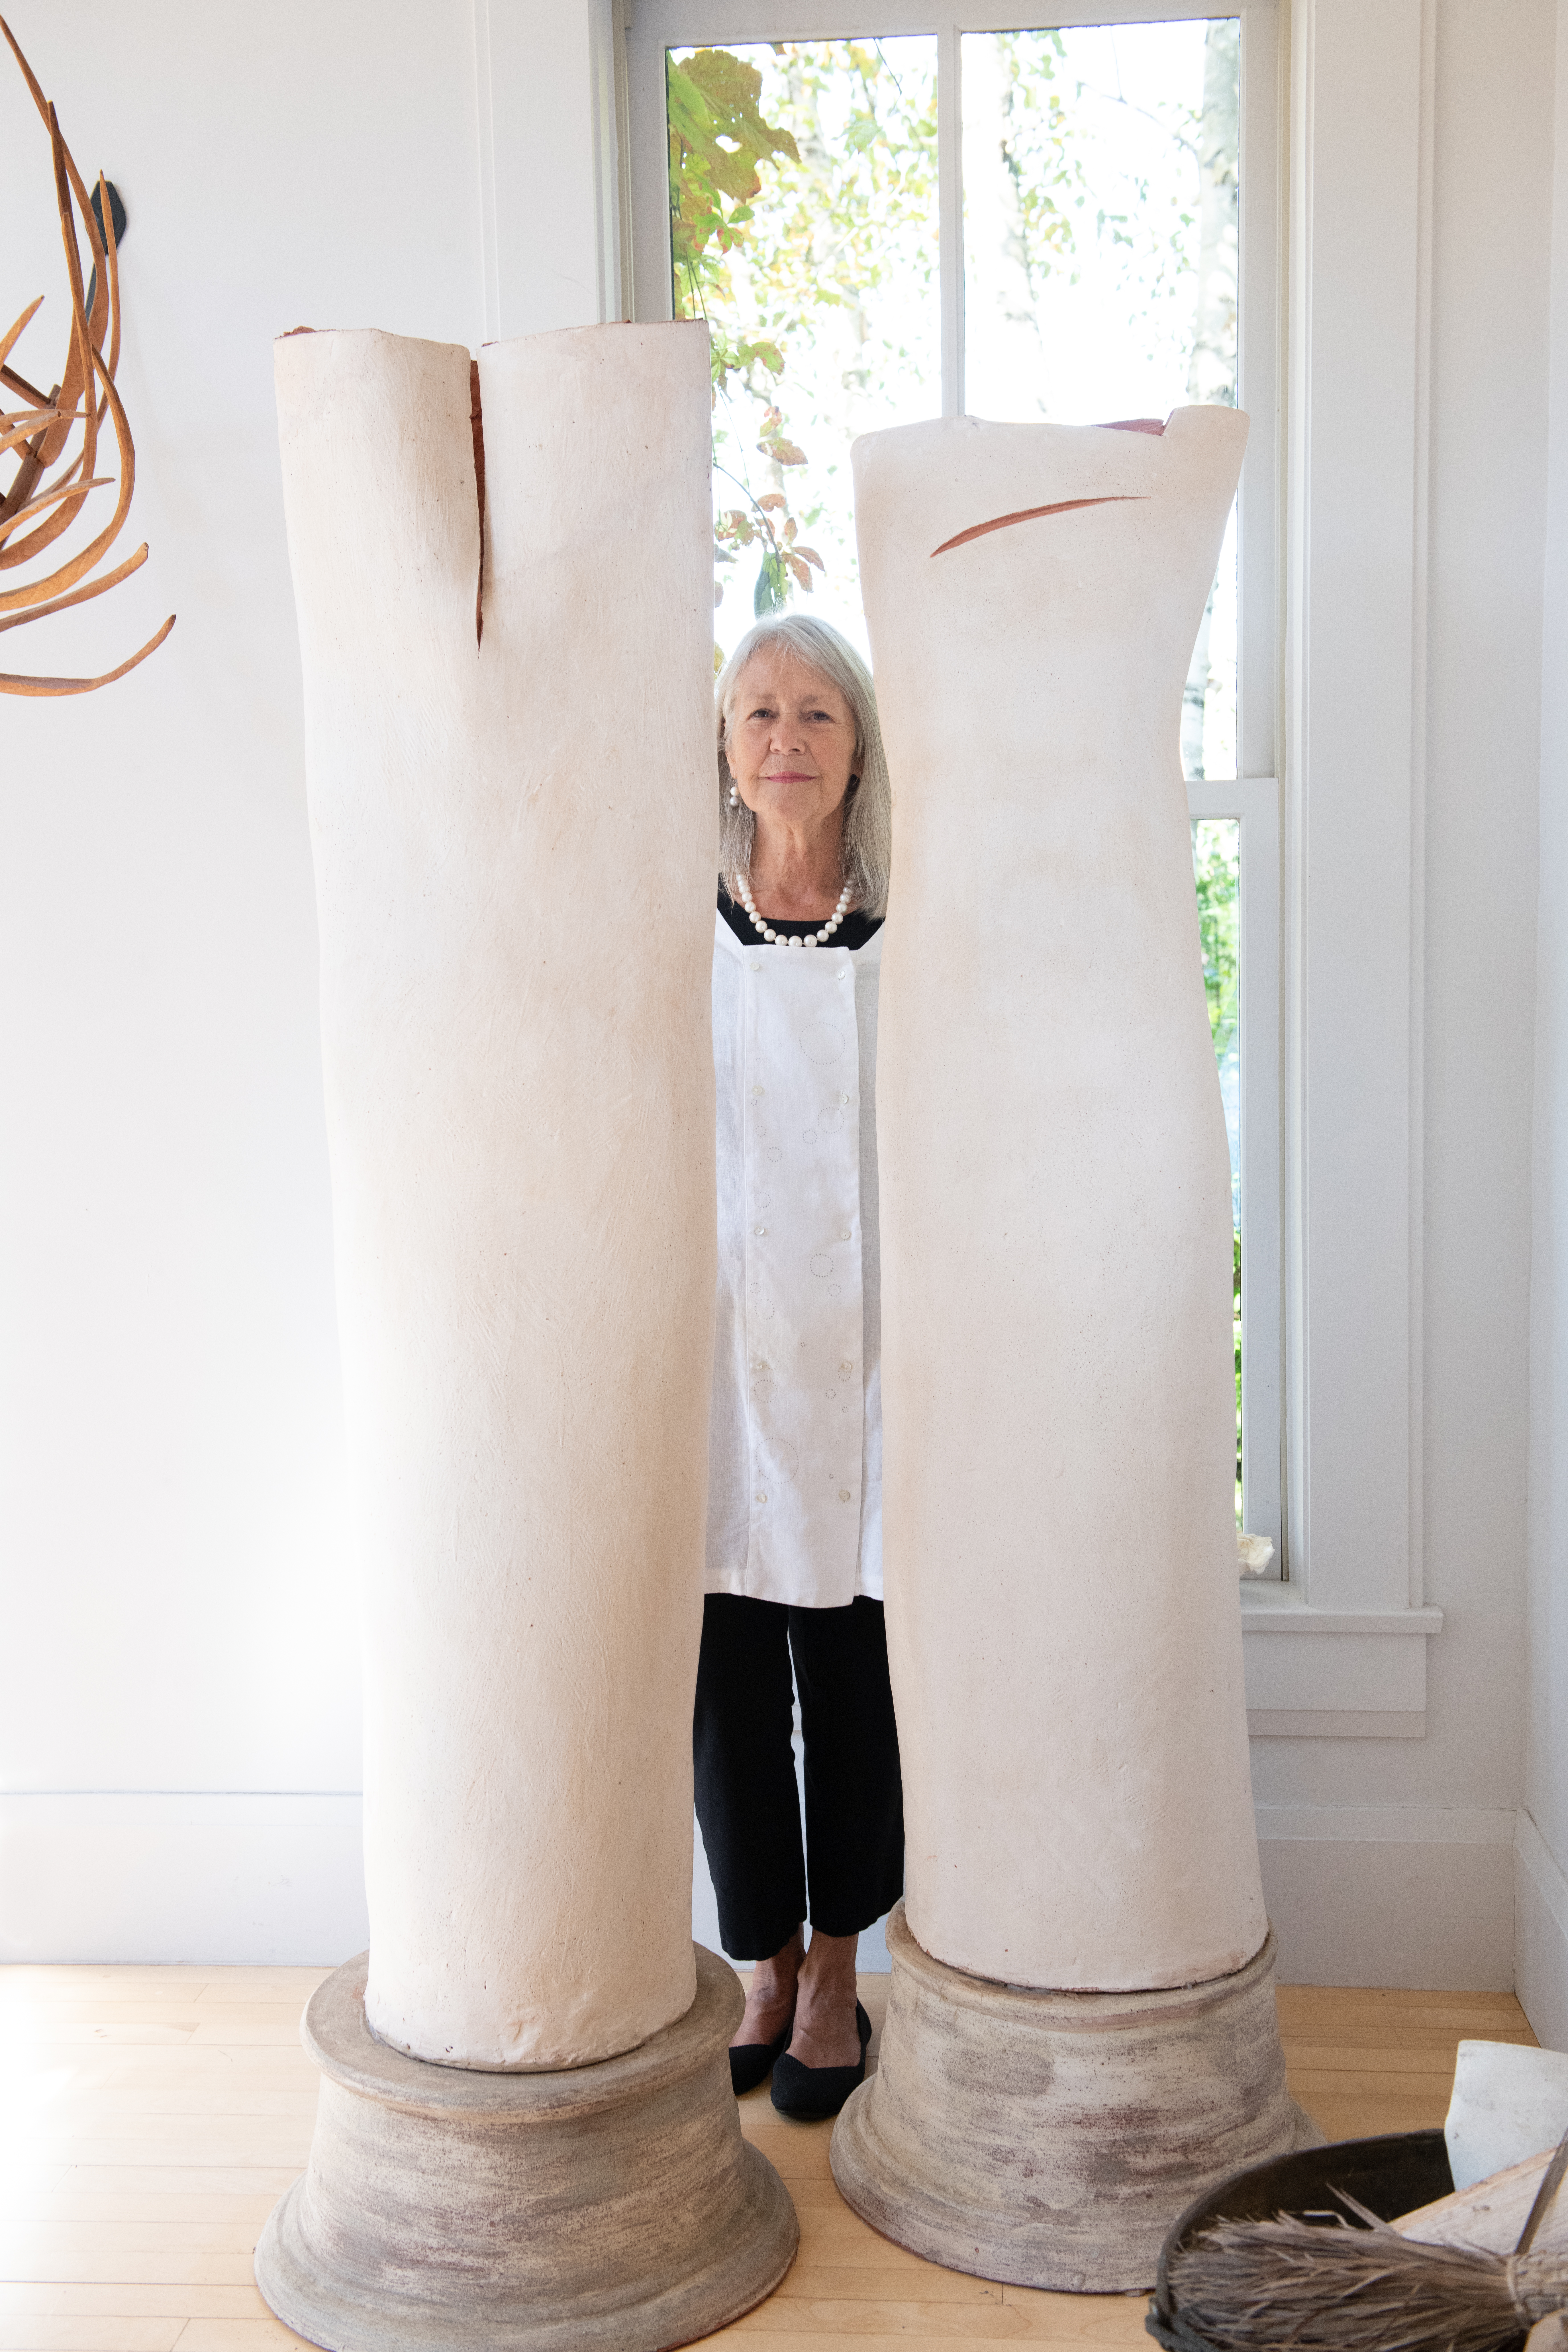 June in the white Medulla tunic, standing behind the ceramic “TreeForms” sculpture by Sharon Townshend